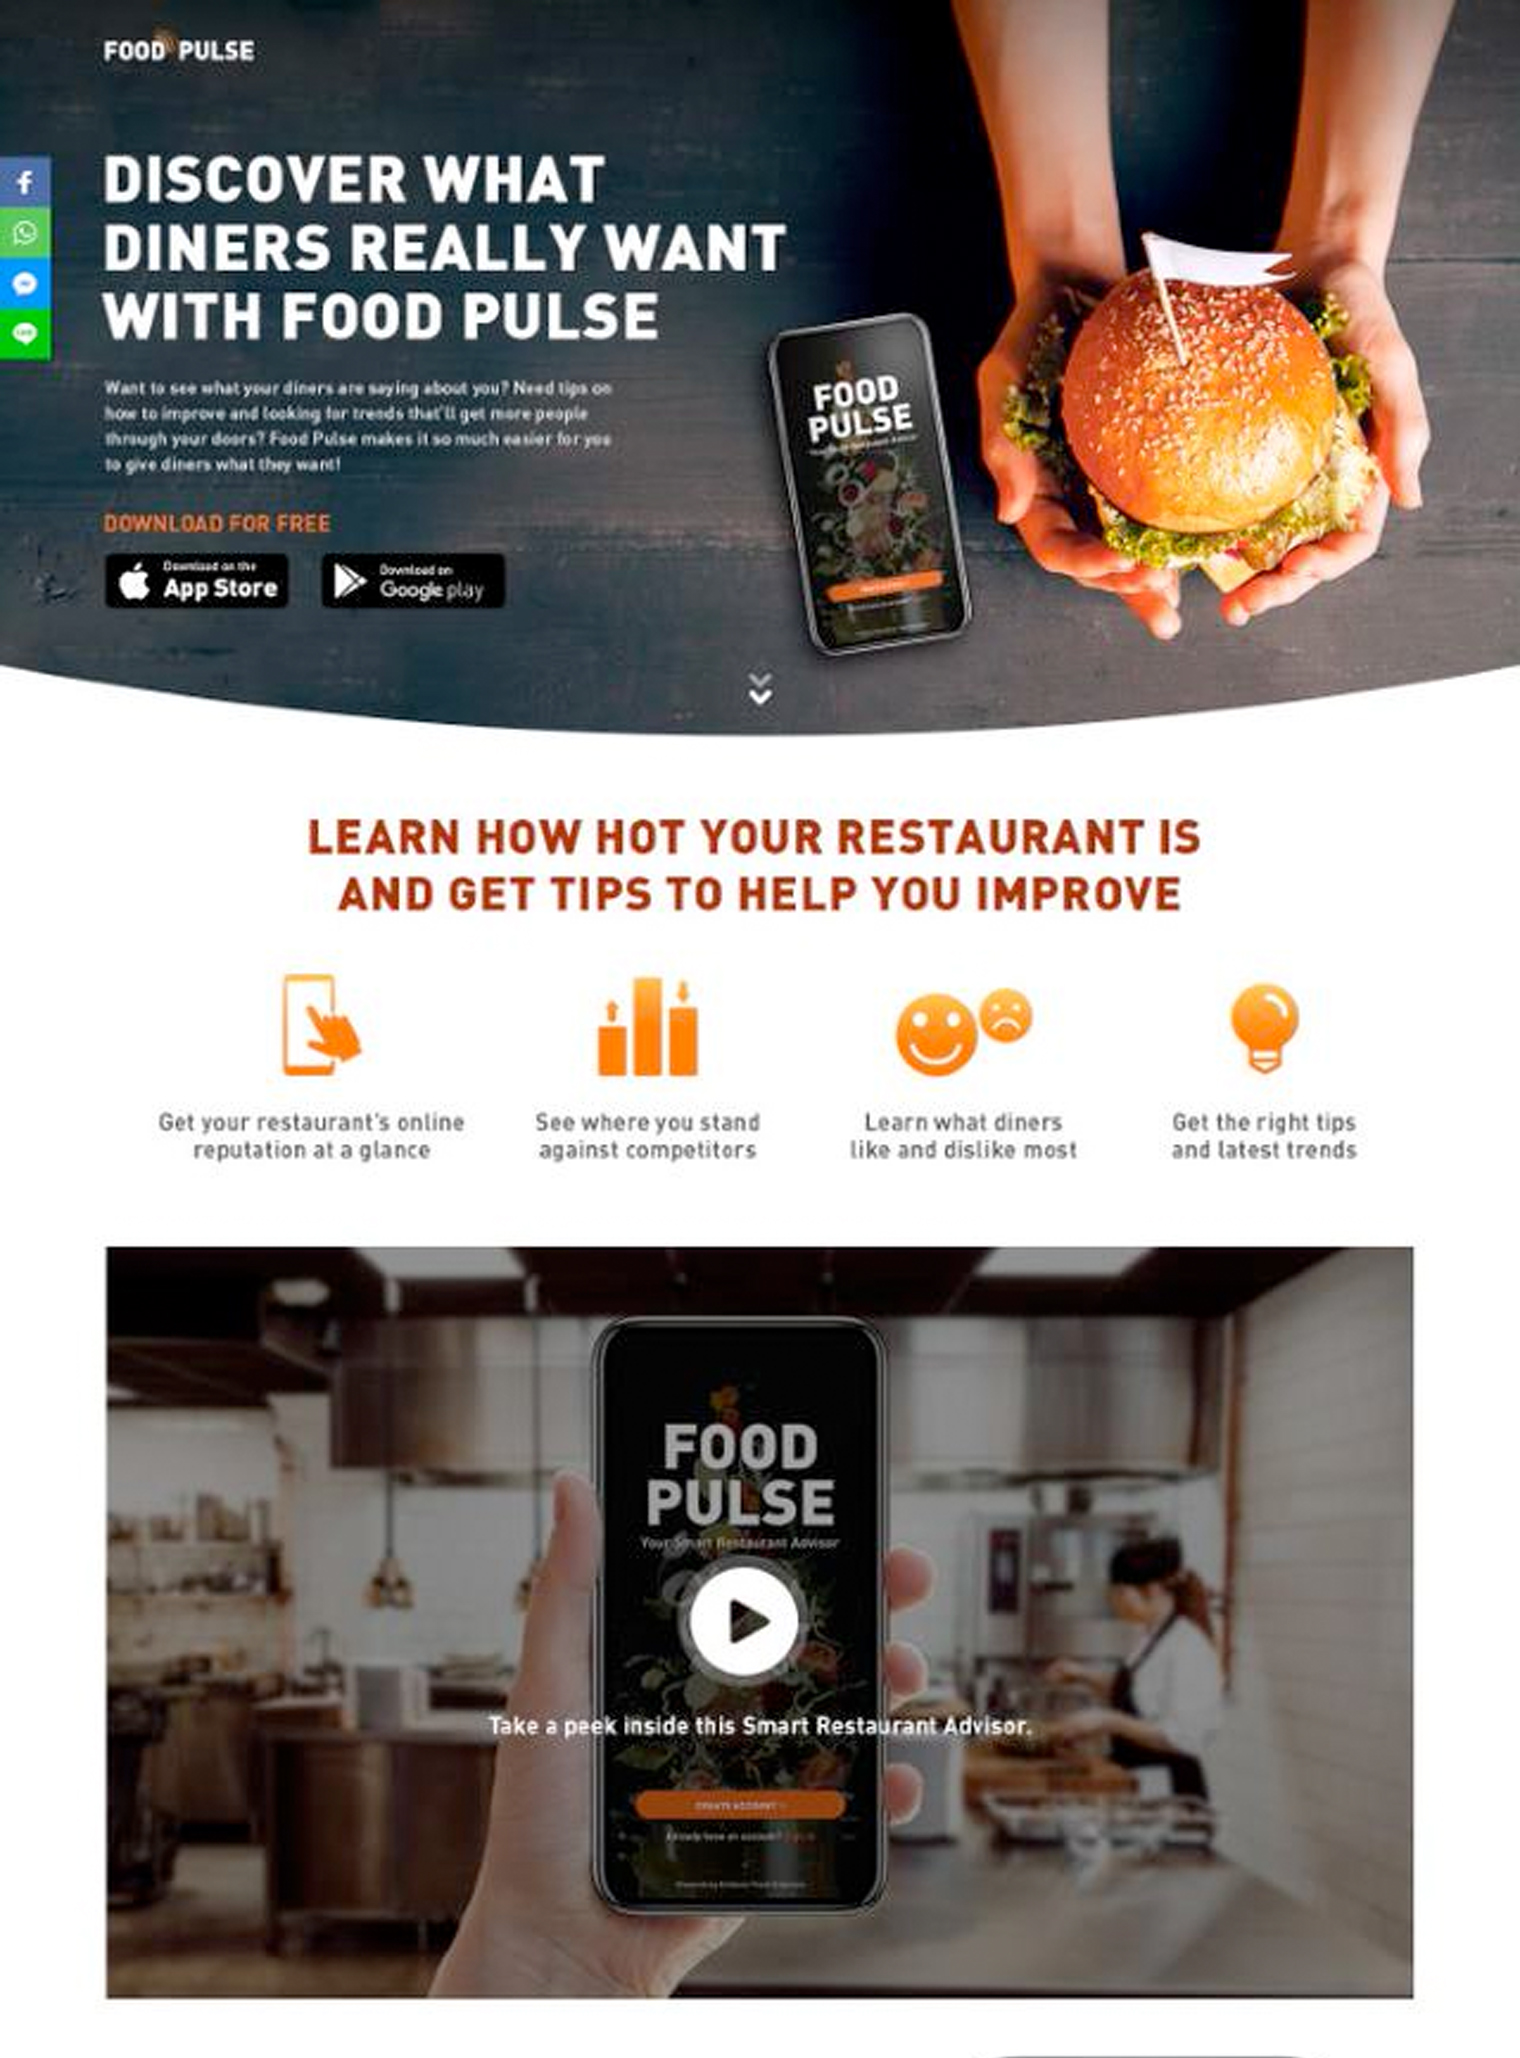 Food Pulse App Overview: Learn how hot your restaurant is and get tips to help you improve 